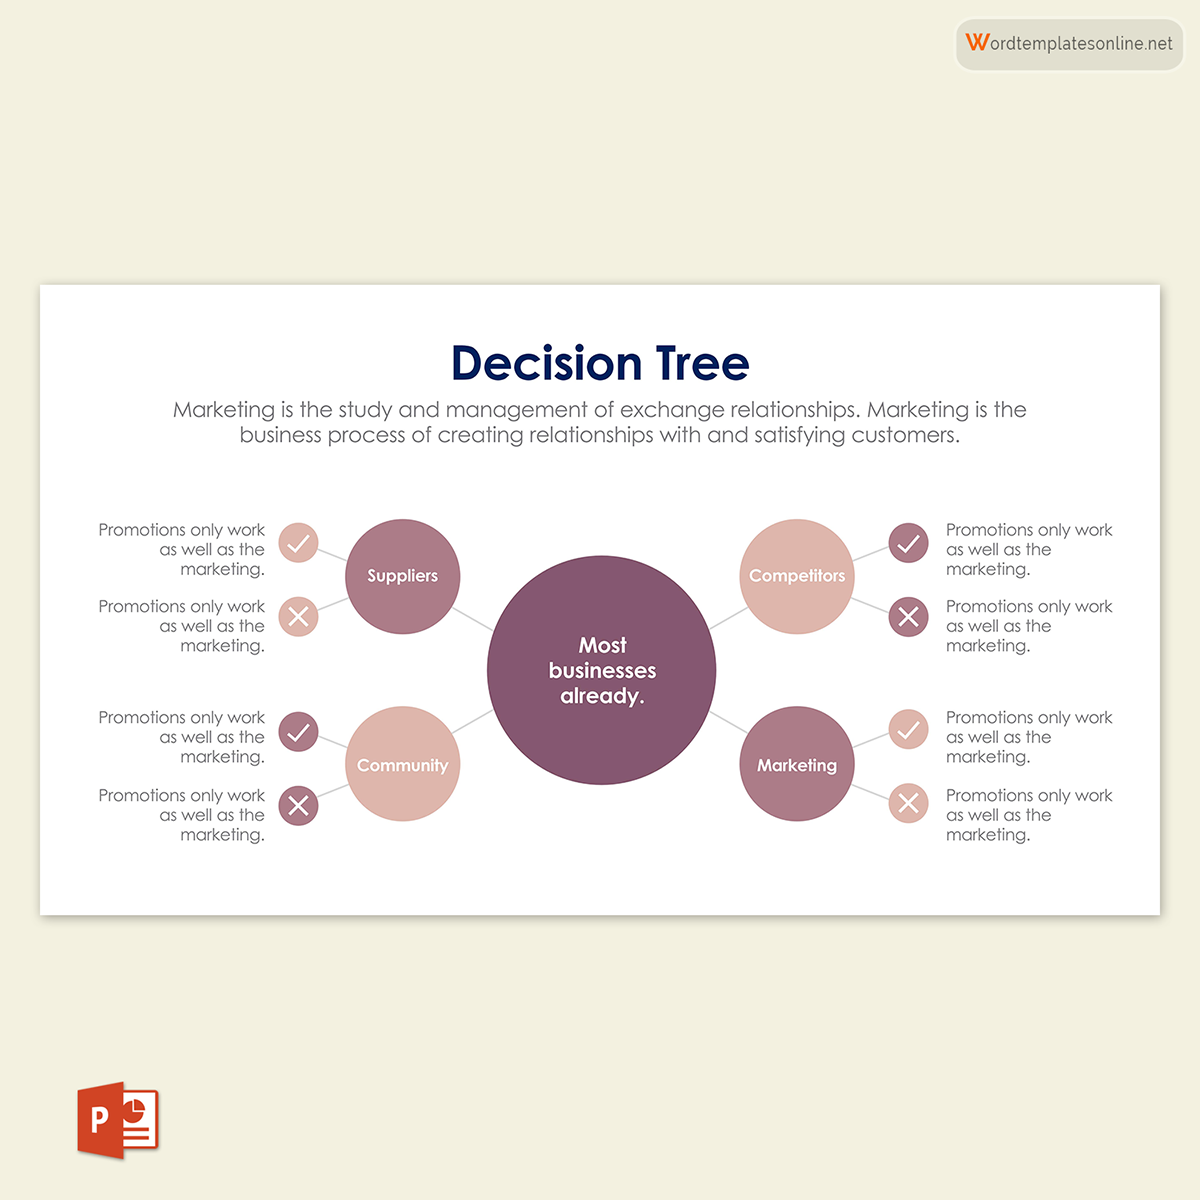 Free Decision Tree Template for PowerPoint 10